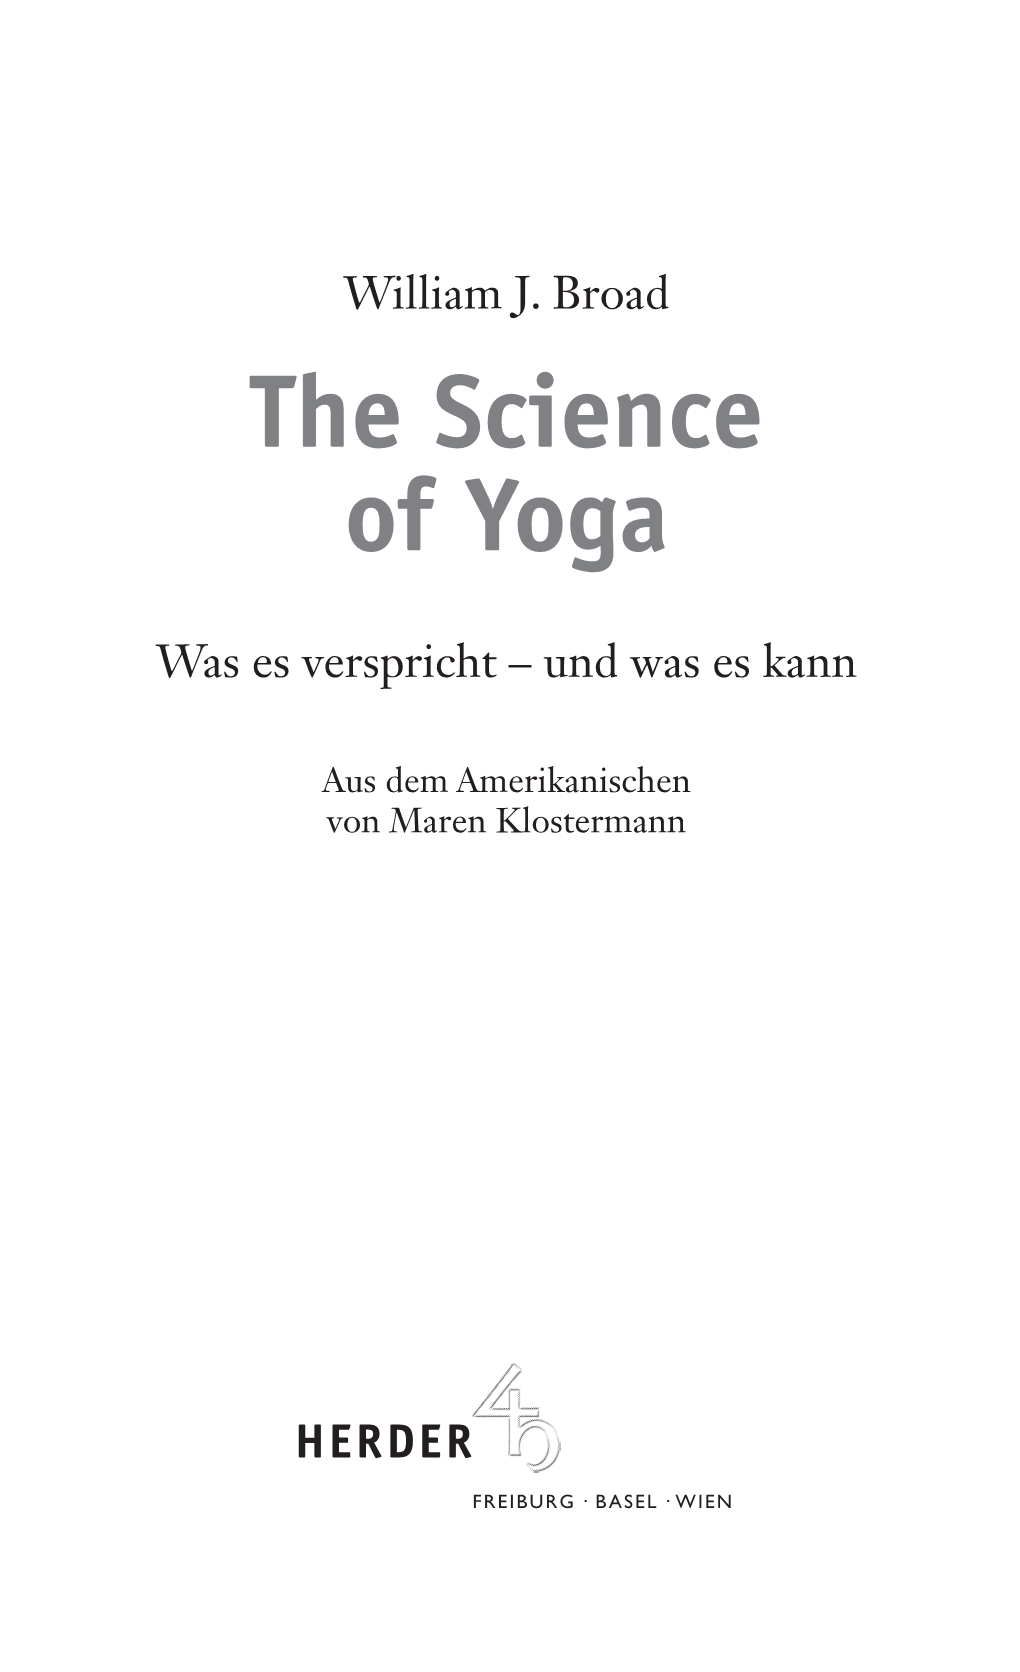 William J. Broad the Science of Yoga